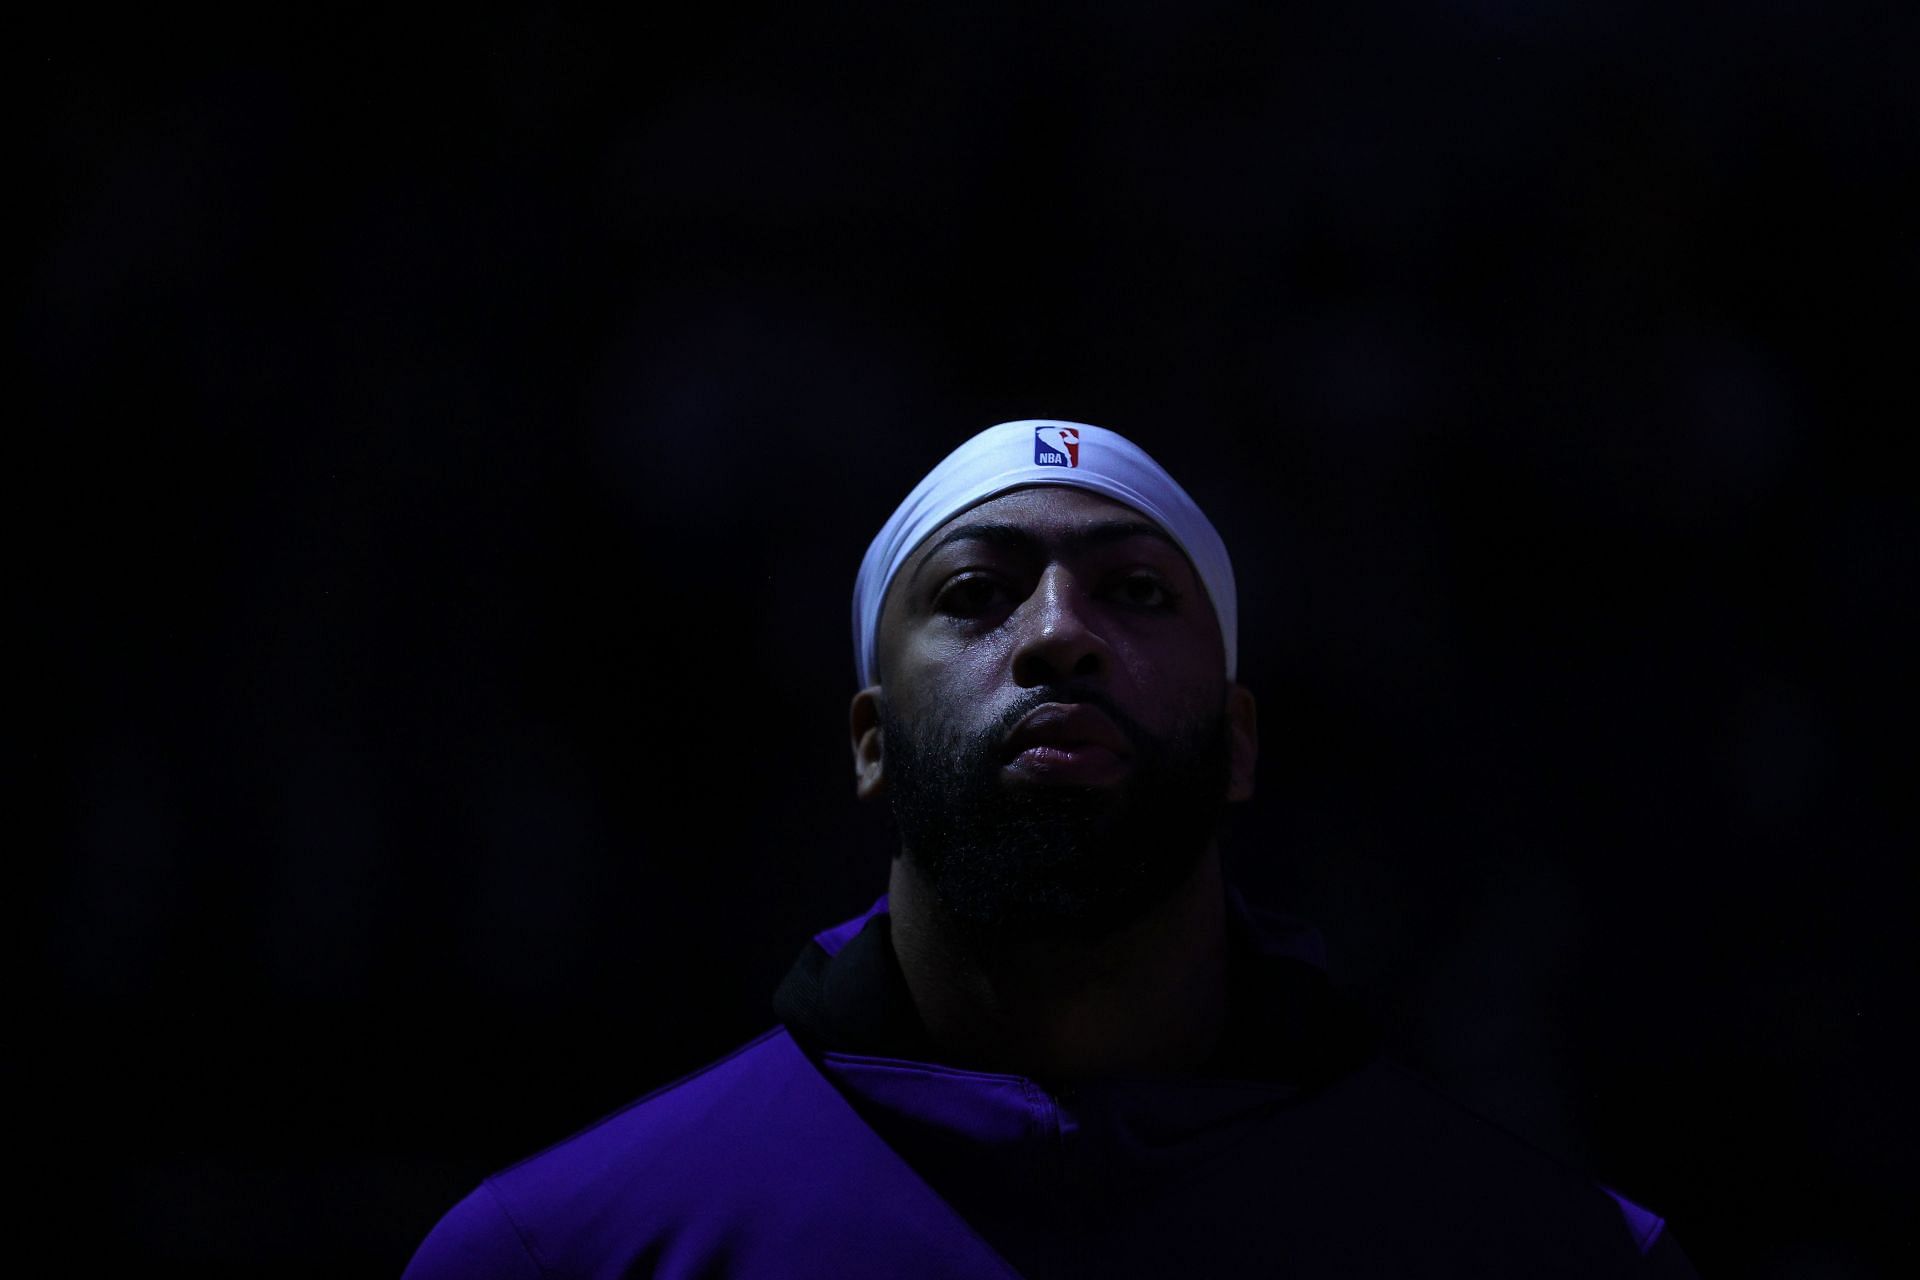 Anthony Davis of the LA Lakers stands for the national anthem before playing the Sacramento Kings on Nov. 30 in Sacramento, California.